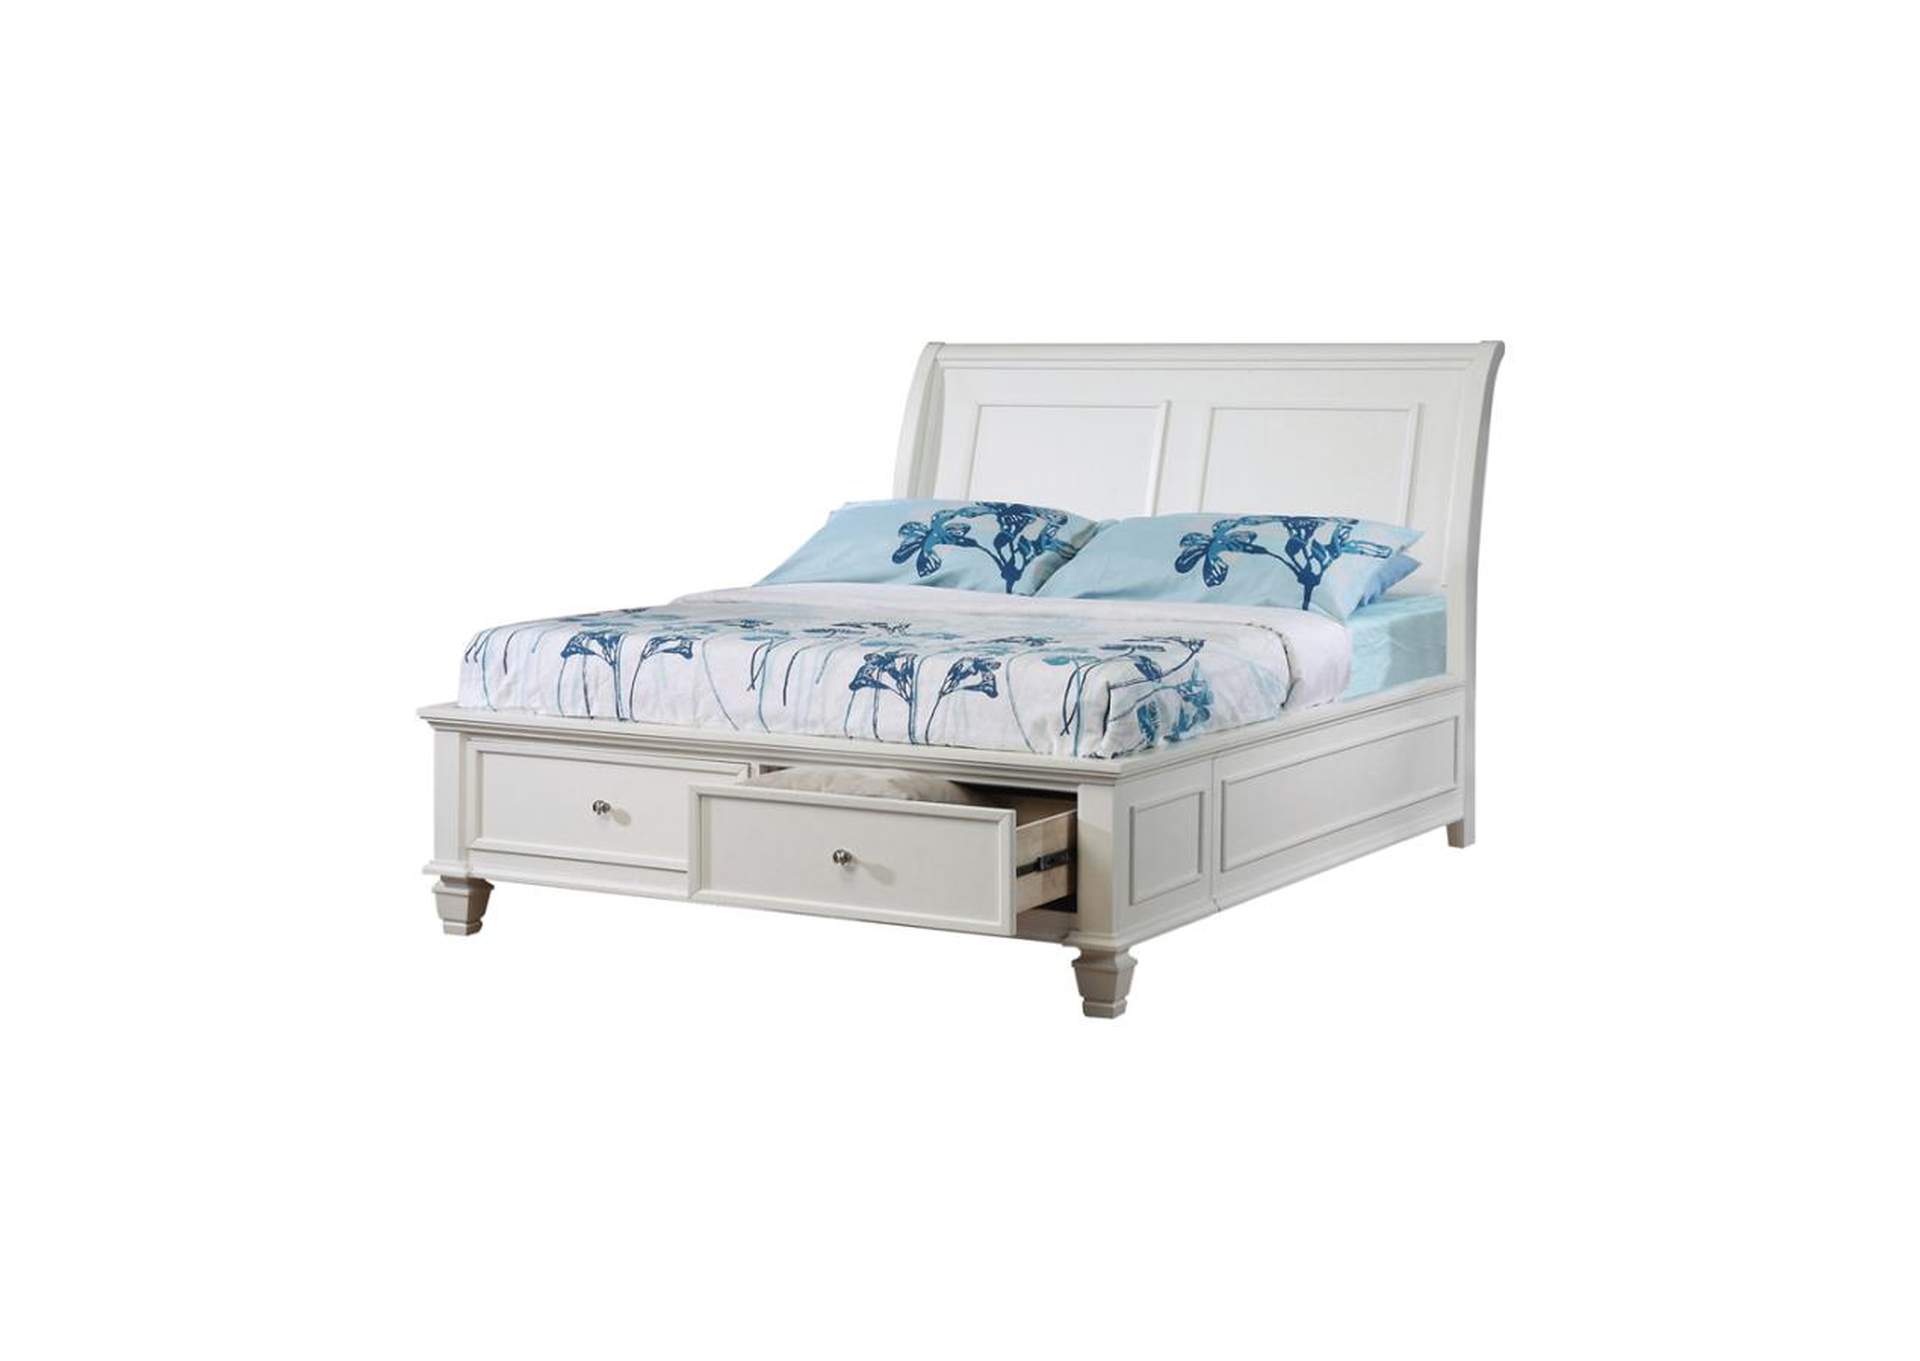 Selena Twin Sleigh Bed With Footboard Storage Buttermilk,Coaster Furniture